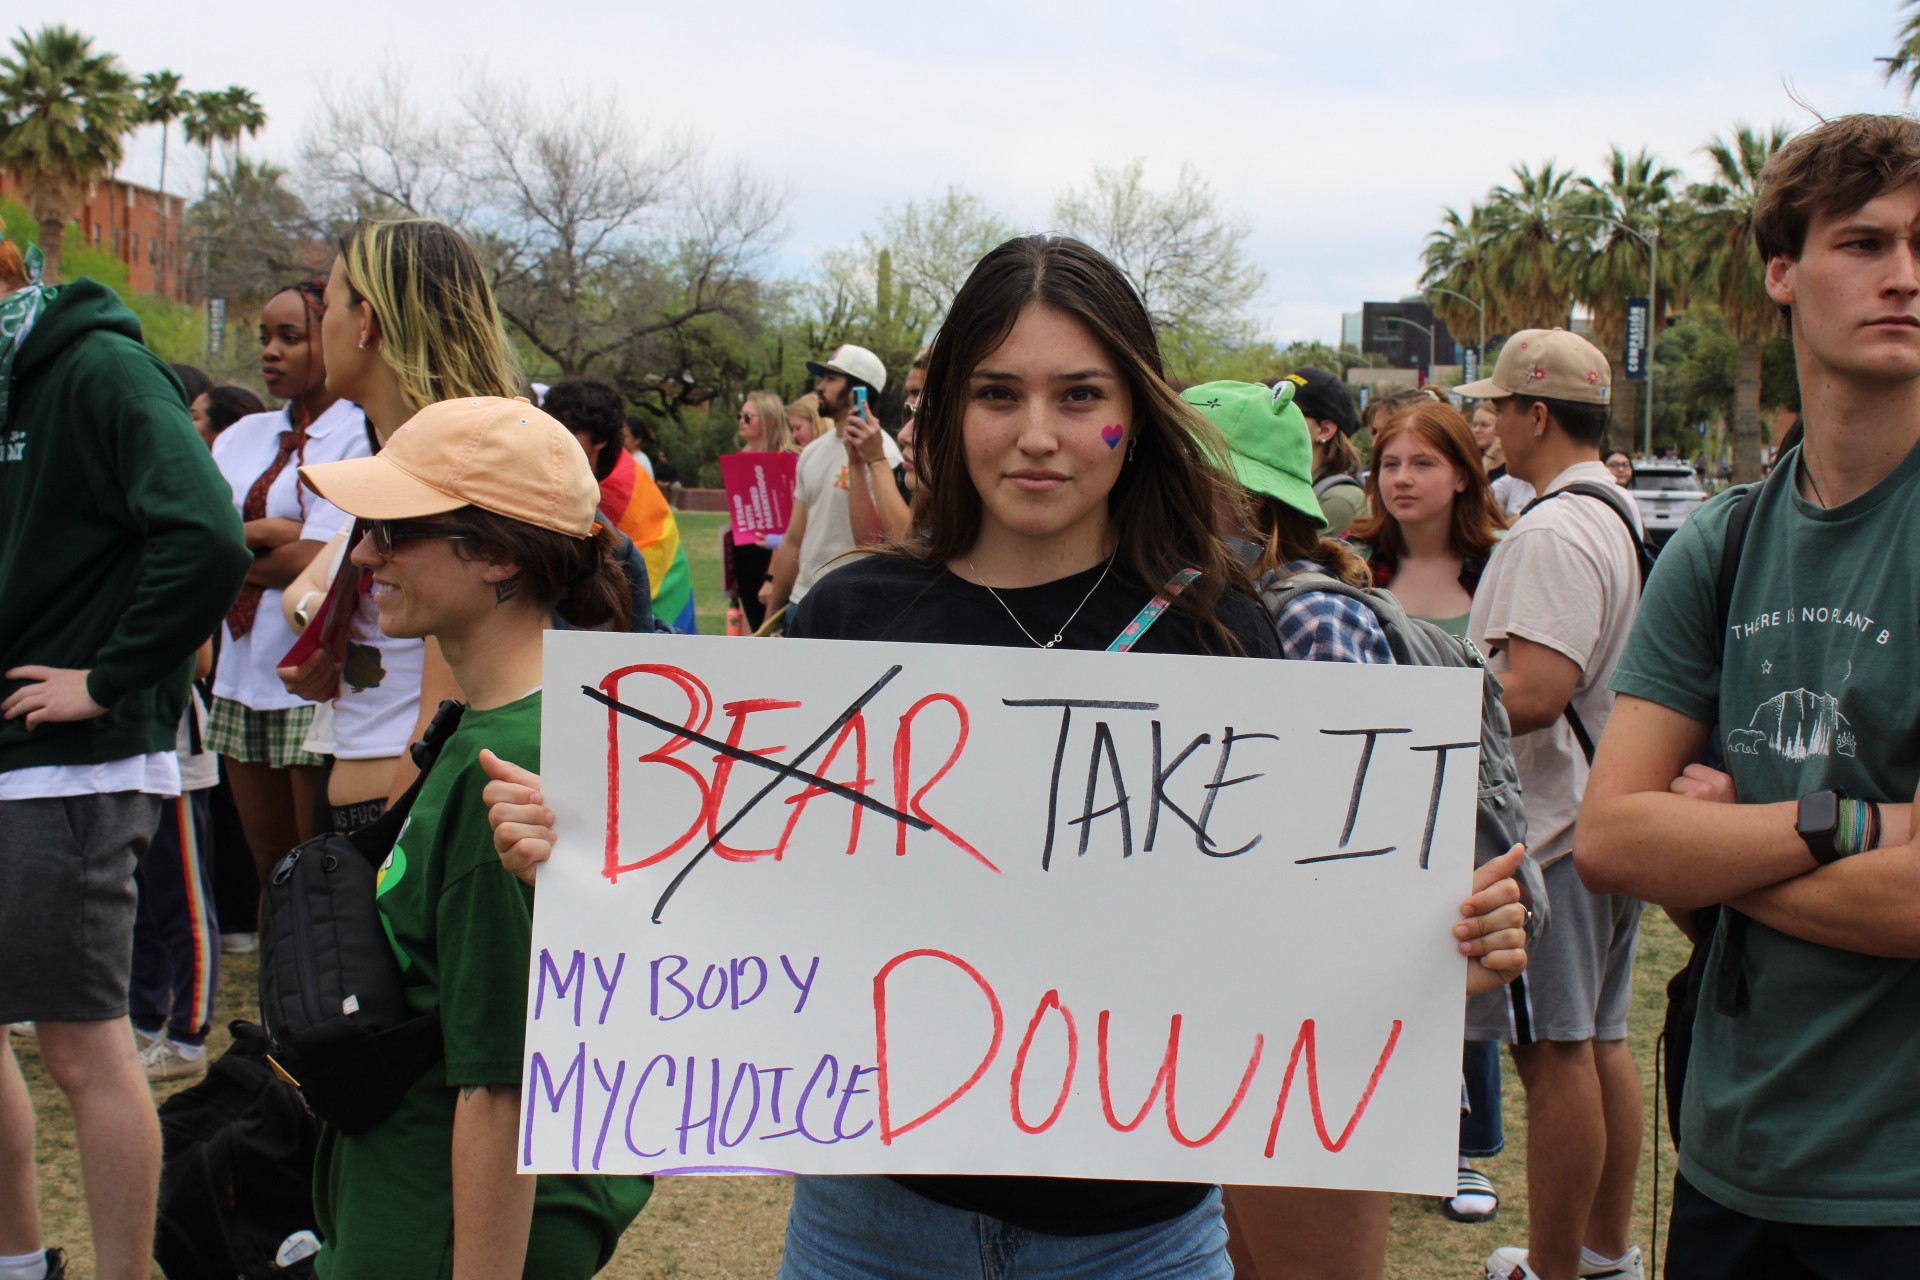 A University of Arizona student and pro-choice supporter holds a sign in protest of the anti-abortion demonstration on display on campus on Thursday, April 13.